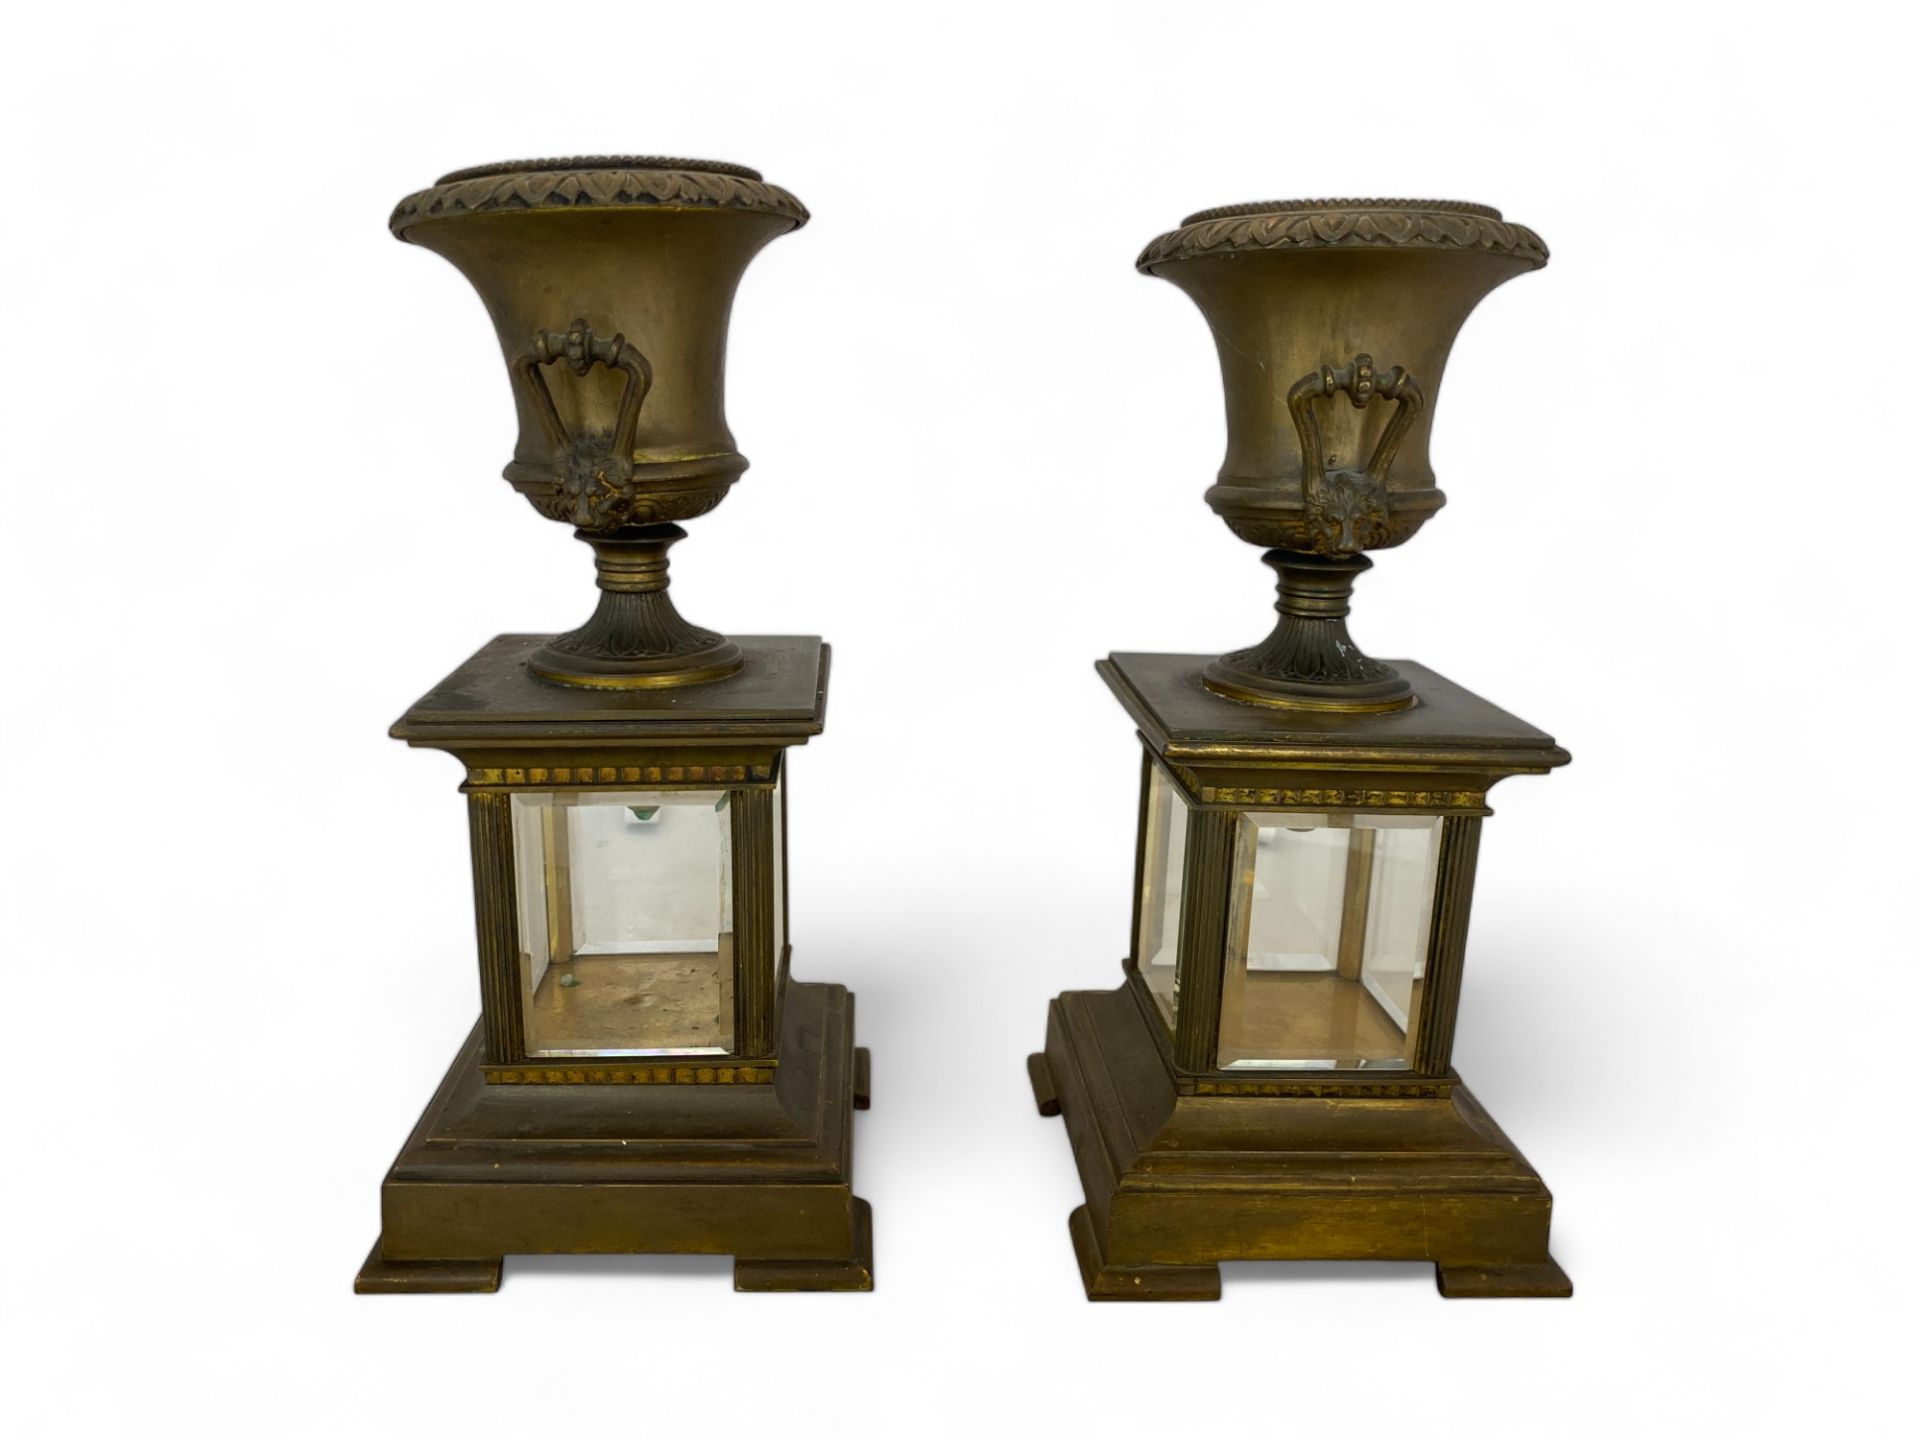 A pair of 19th century gilt bronze chimney ornaments - Image 8 of 12